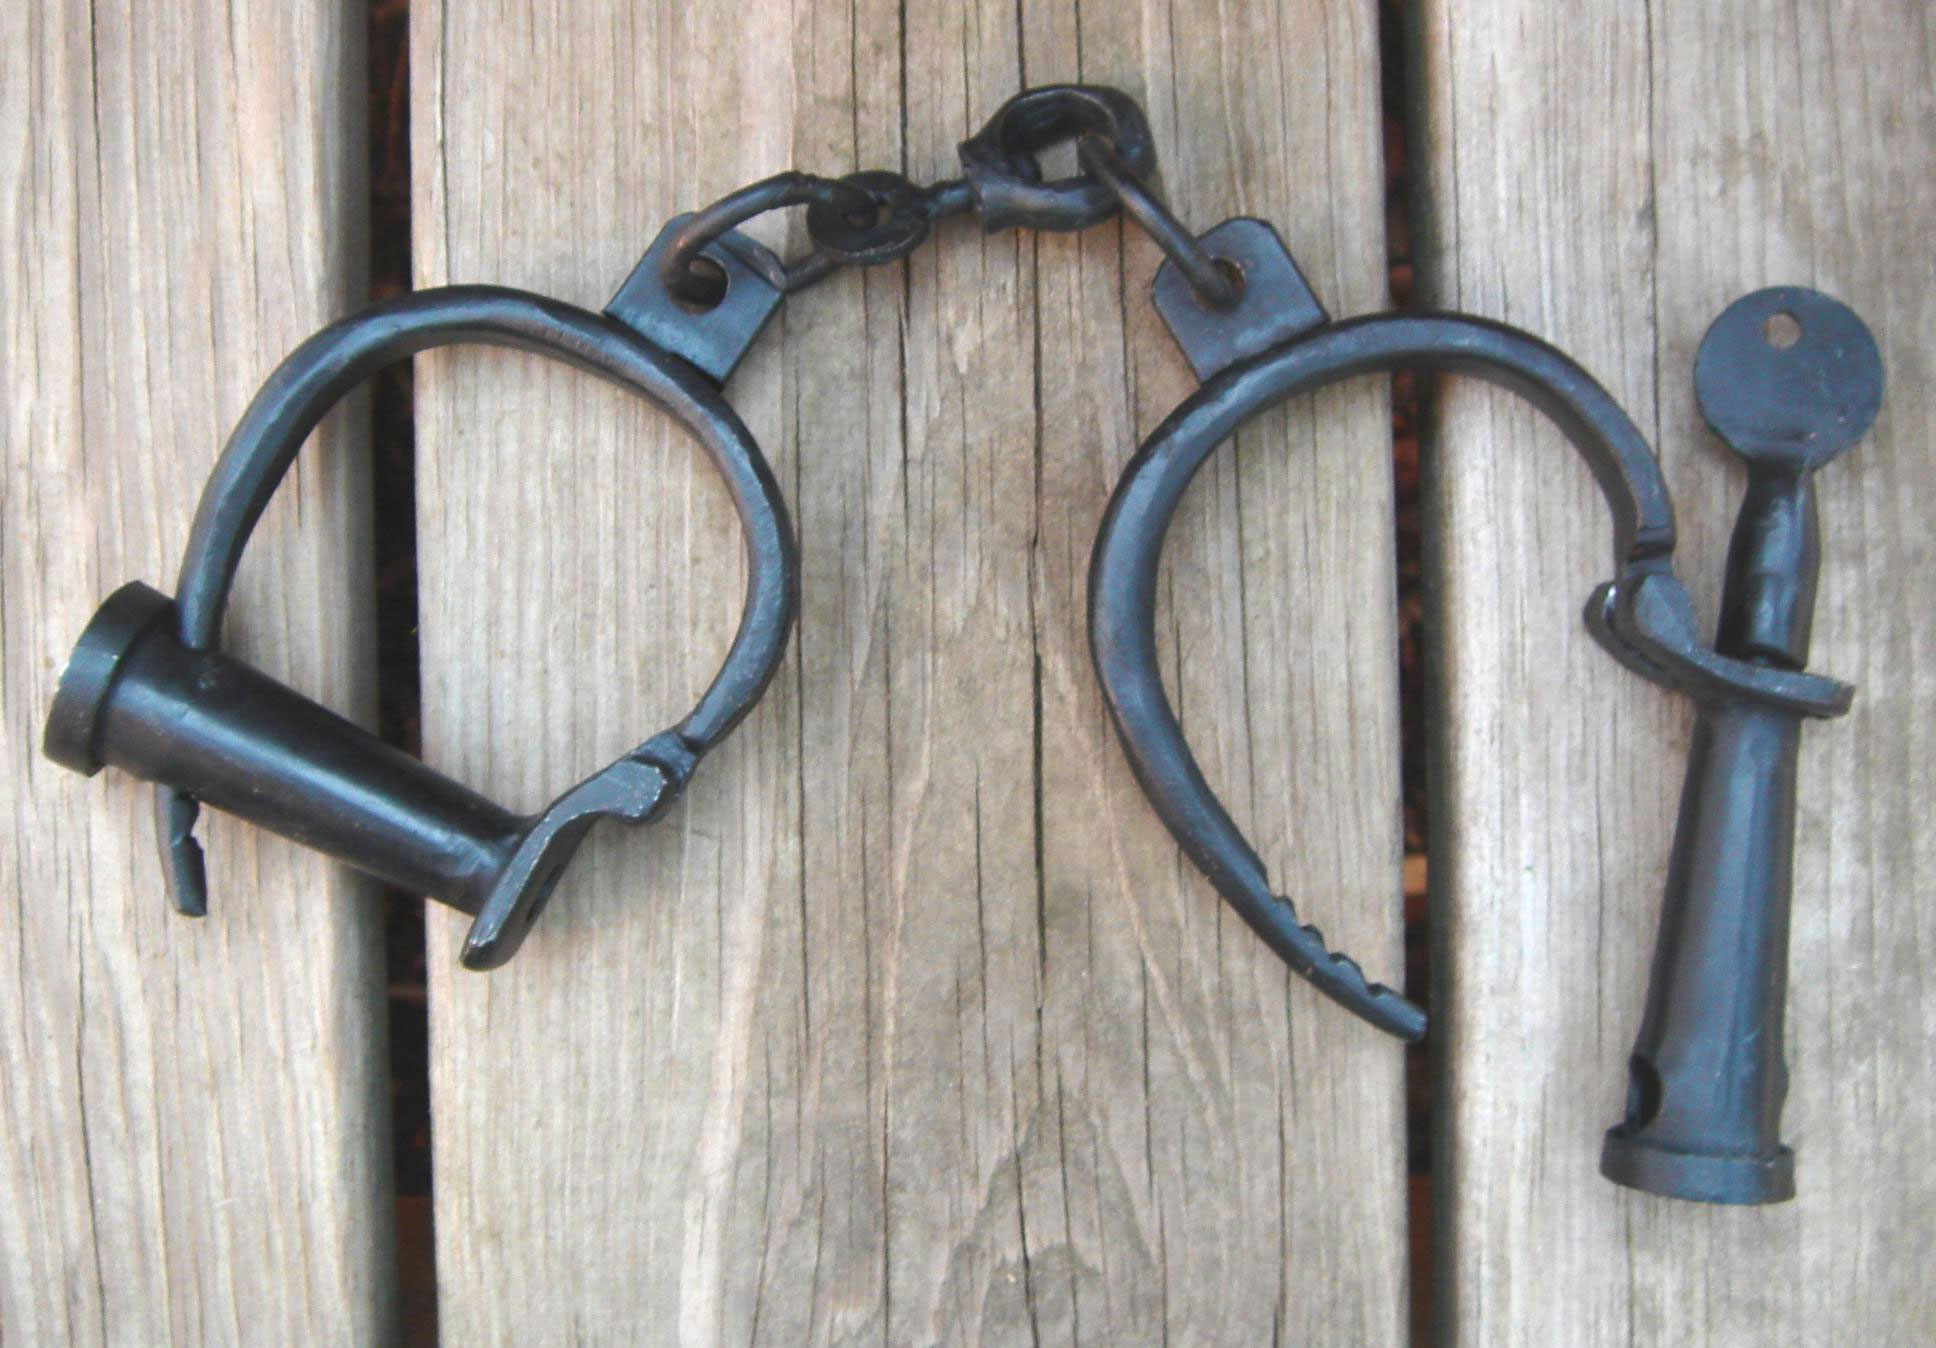 Antique Rep. Cast Iron Working Pirate Ship Police Handcuffs Brig Shackles W Keys